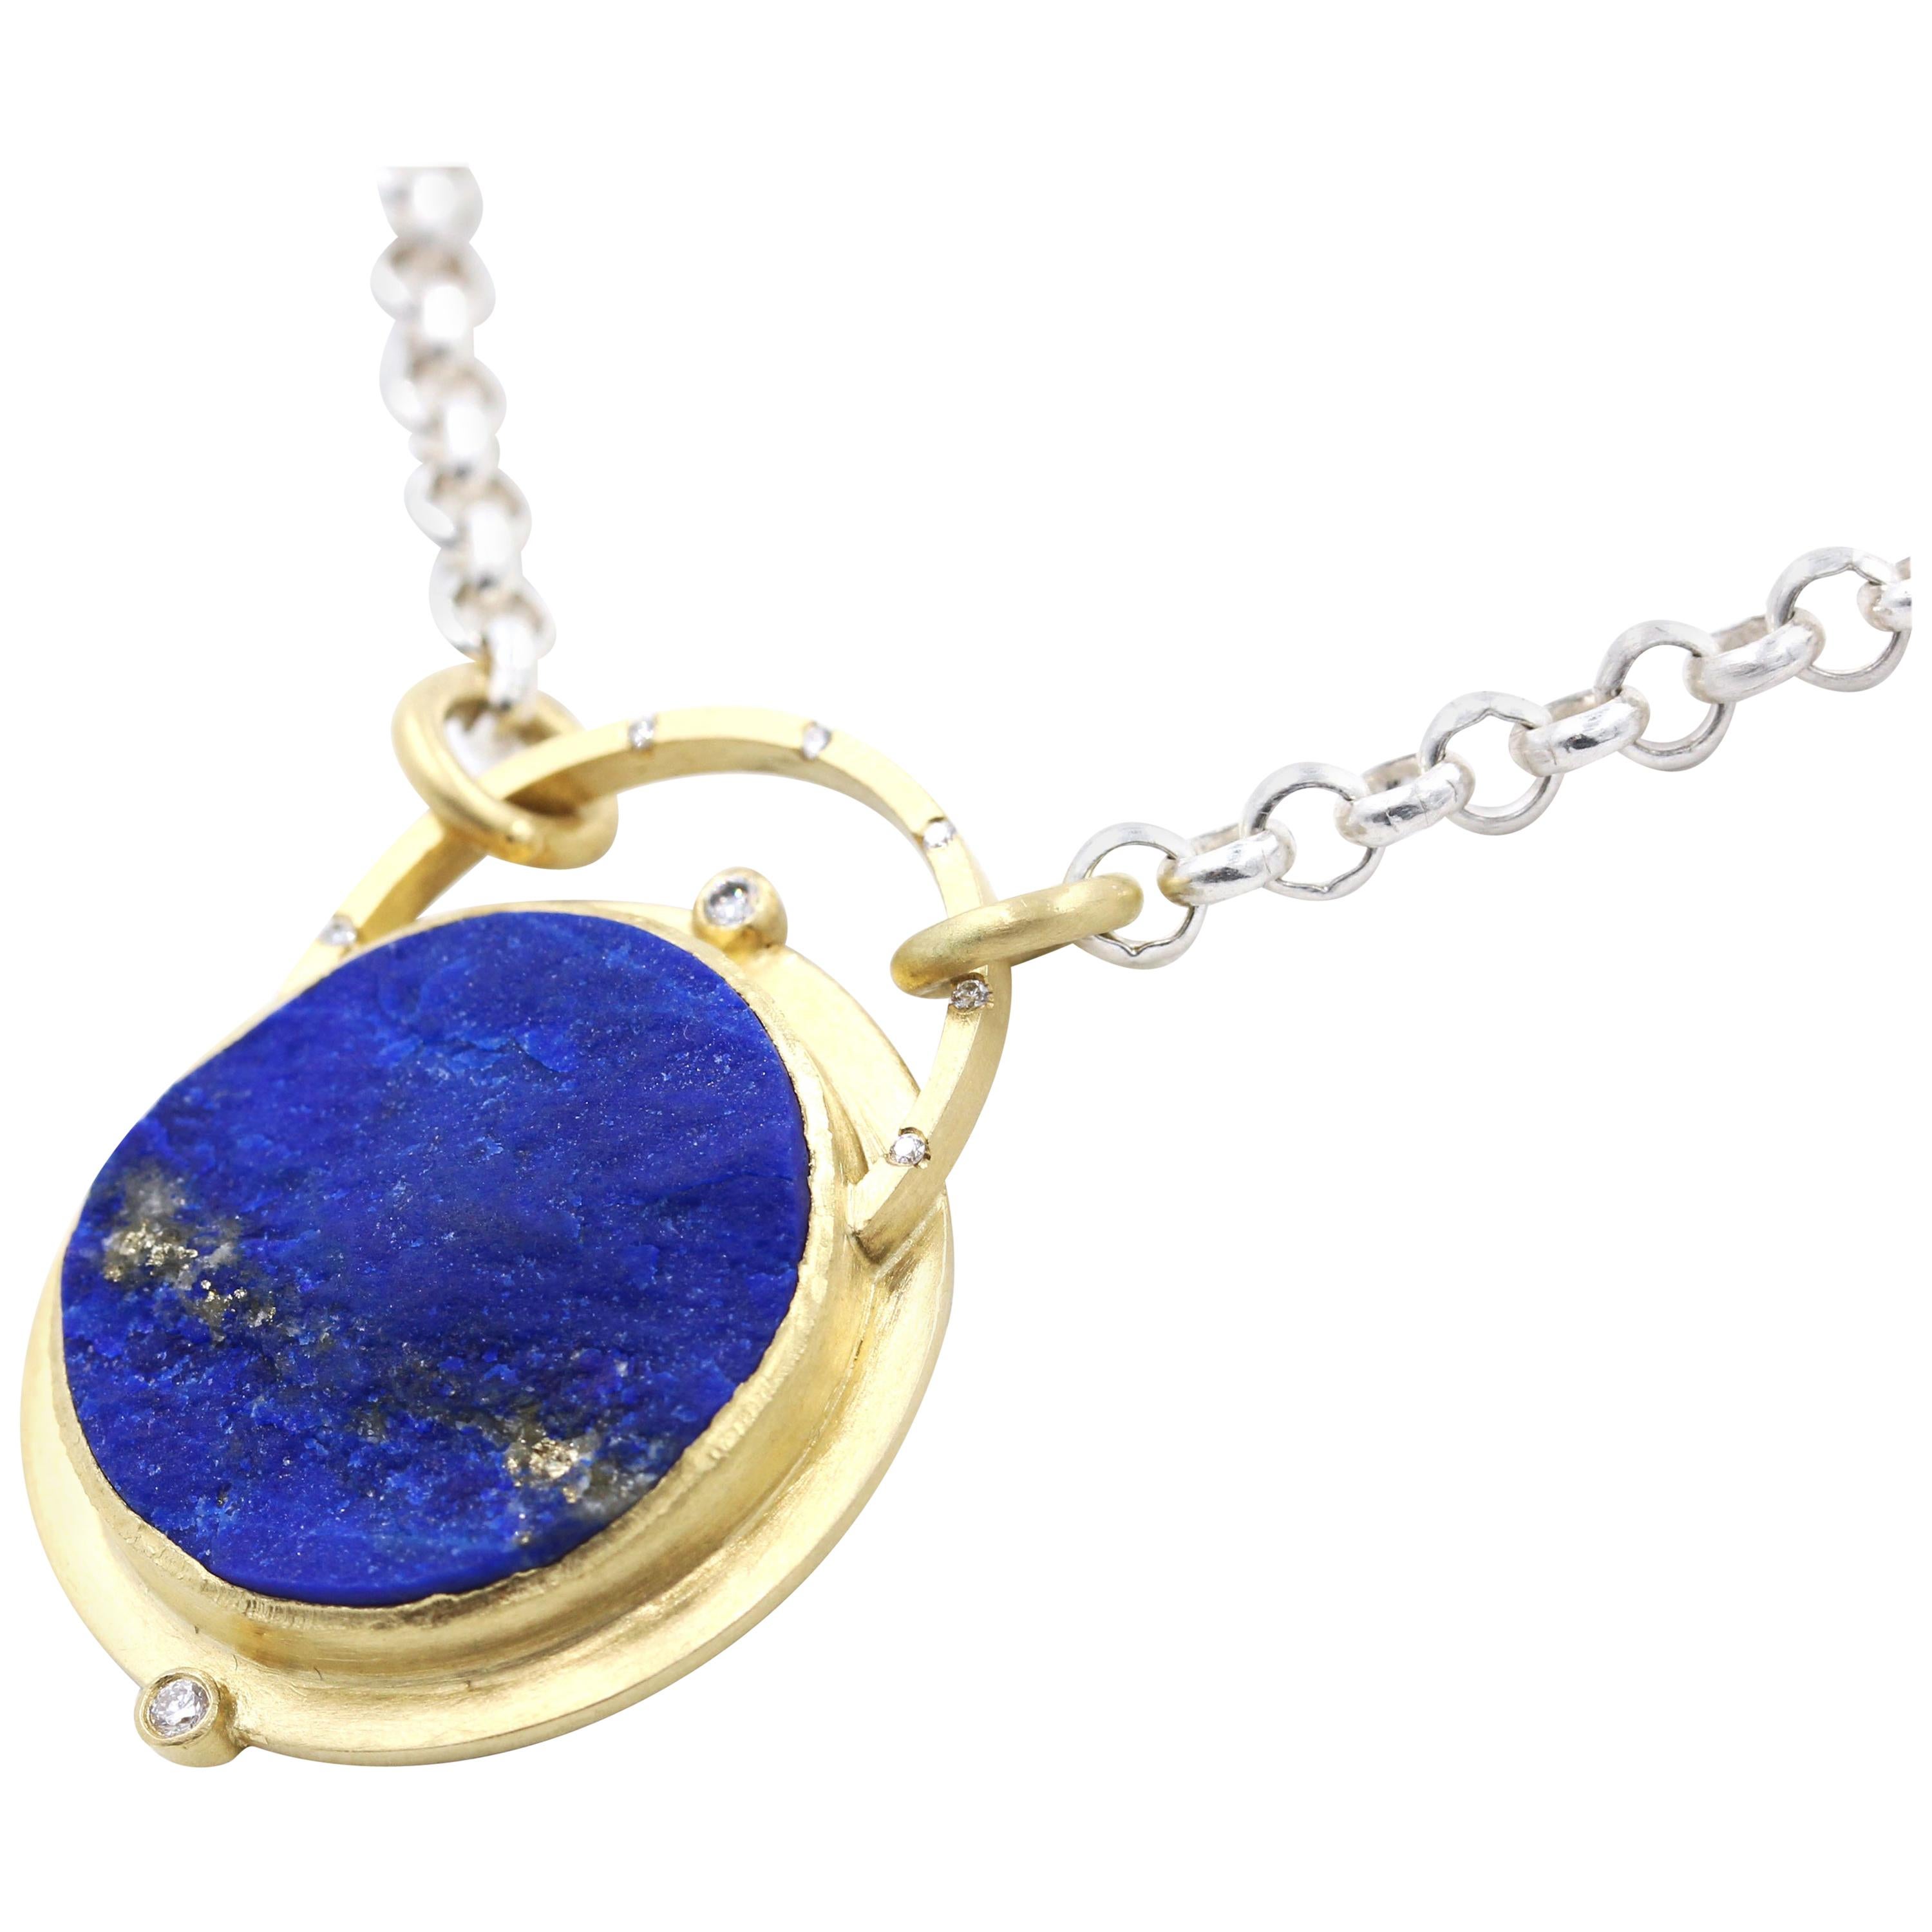 Robin Waynee, Lapis Necklace, Diamonds, Sterling Silver and 18K Gold, 2018 For Sale